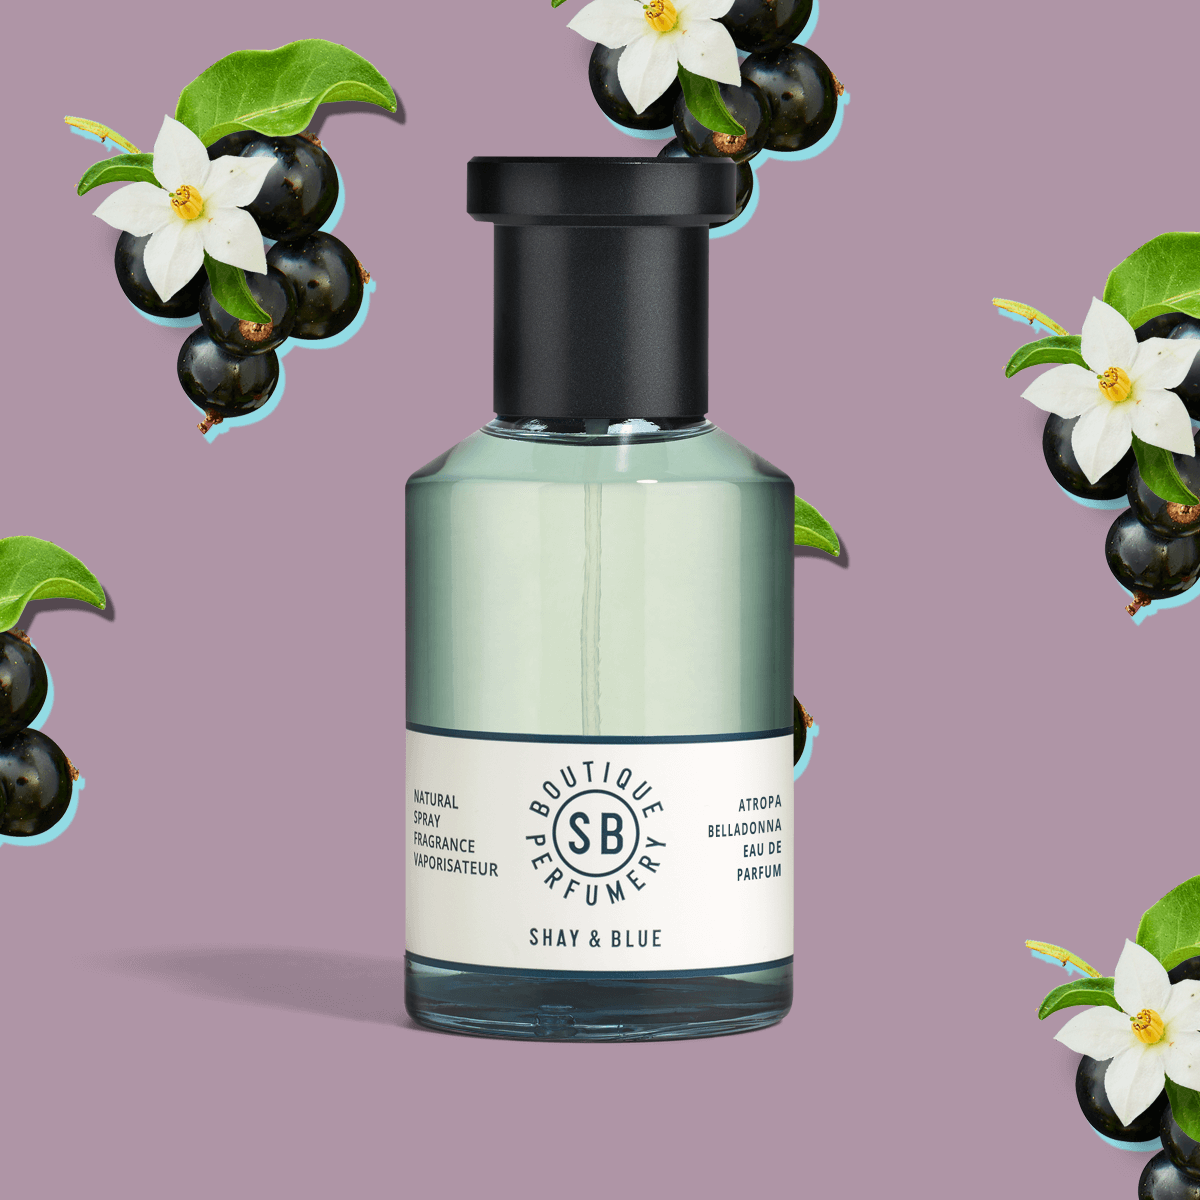 Atropa Belladonna Fragrance 100ml | Cassis berries and jasmine dance with layers of depth from patchouli and vanilla. | Clean All Gender Fragrance | Shay & Blue